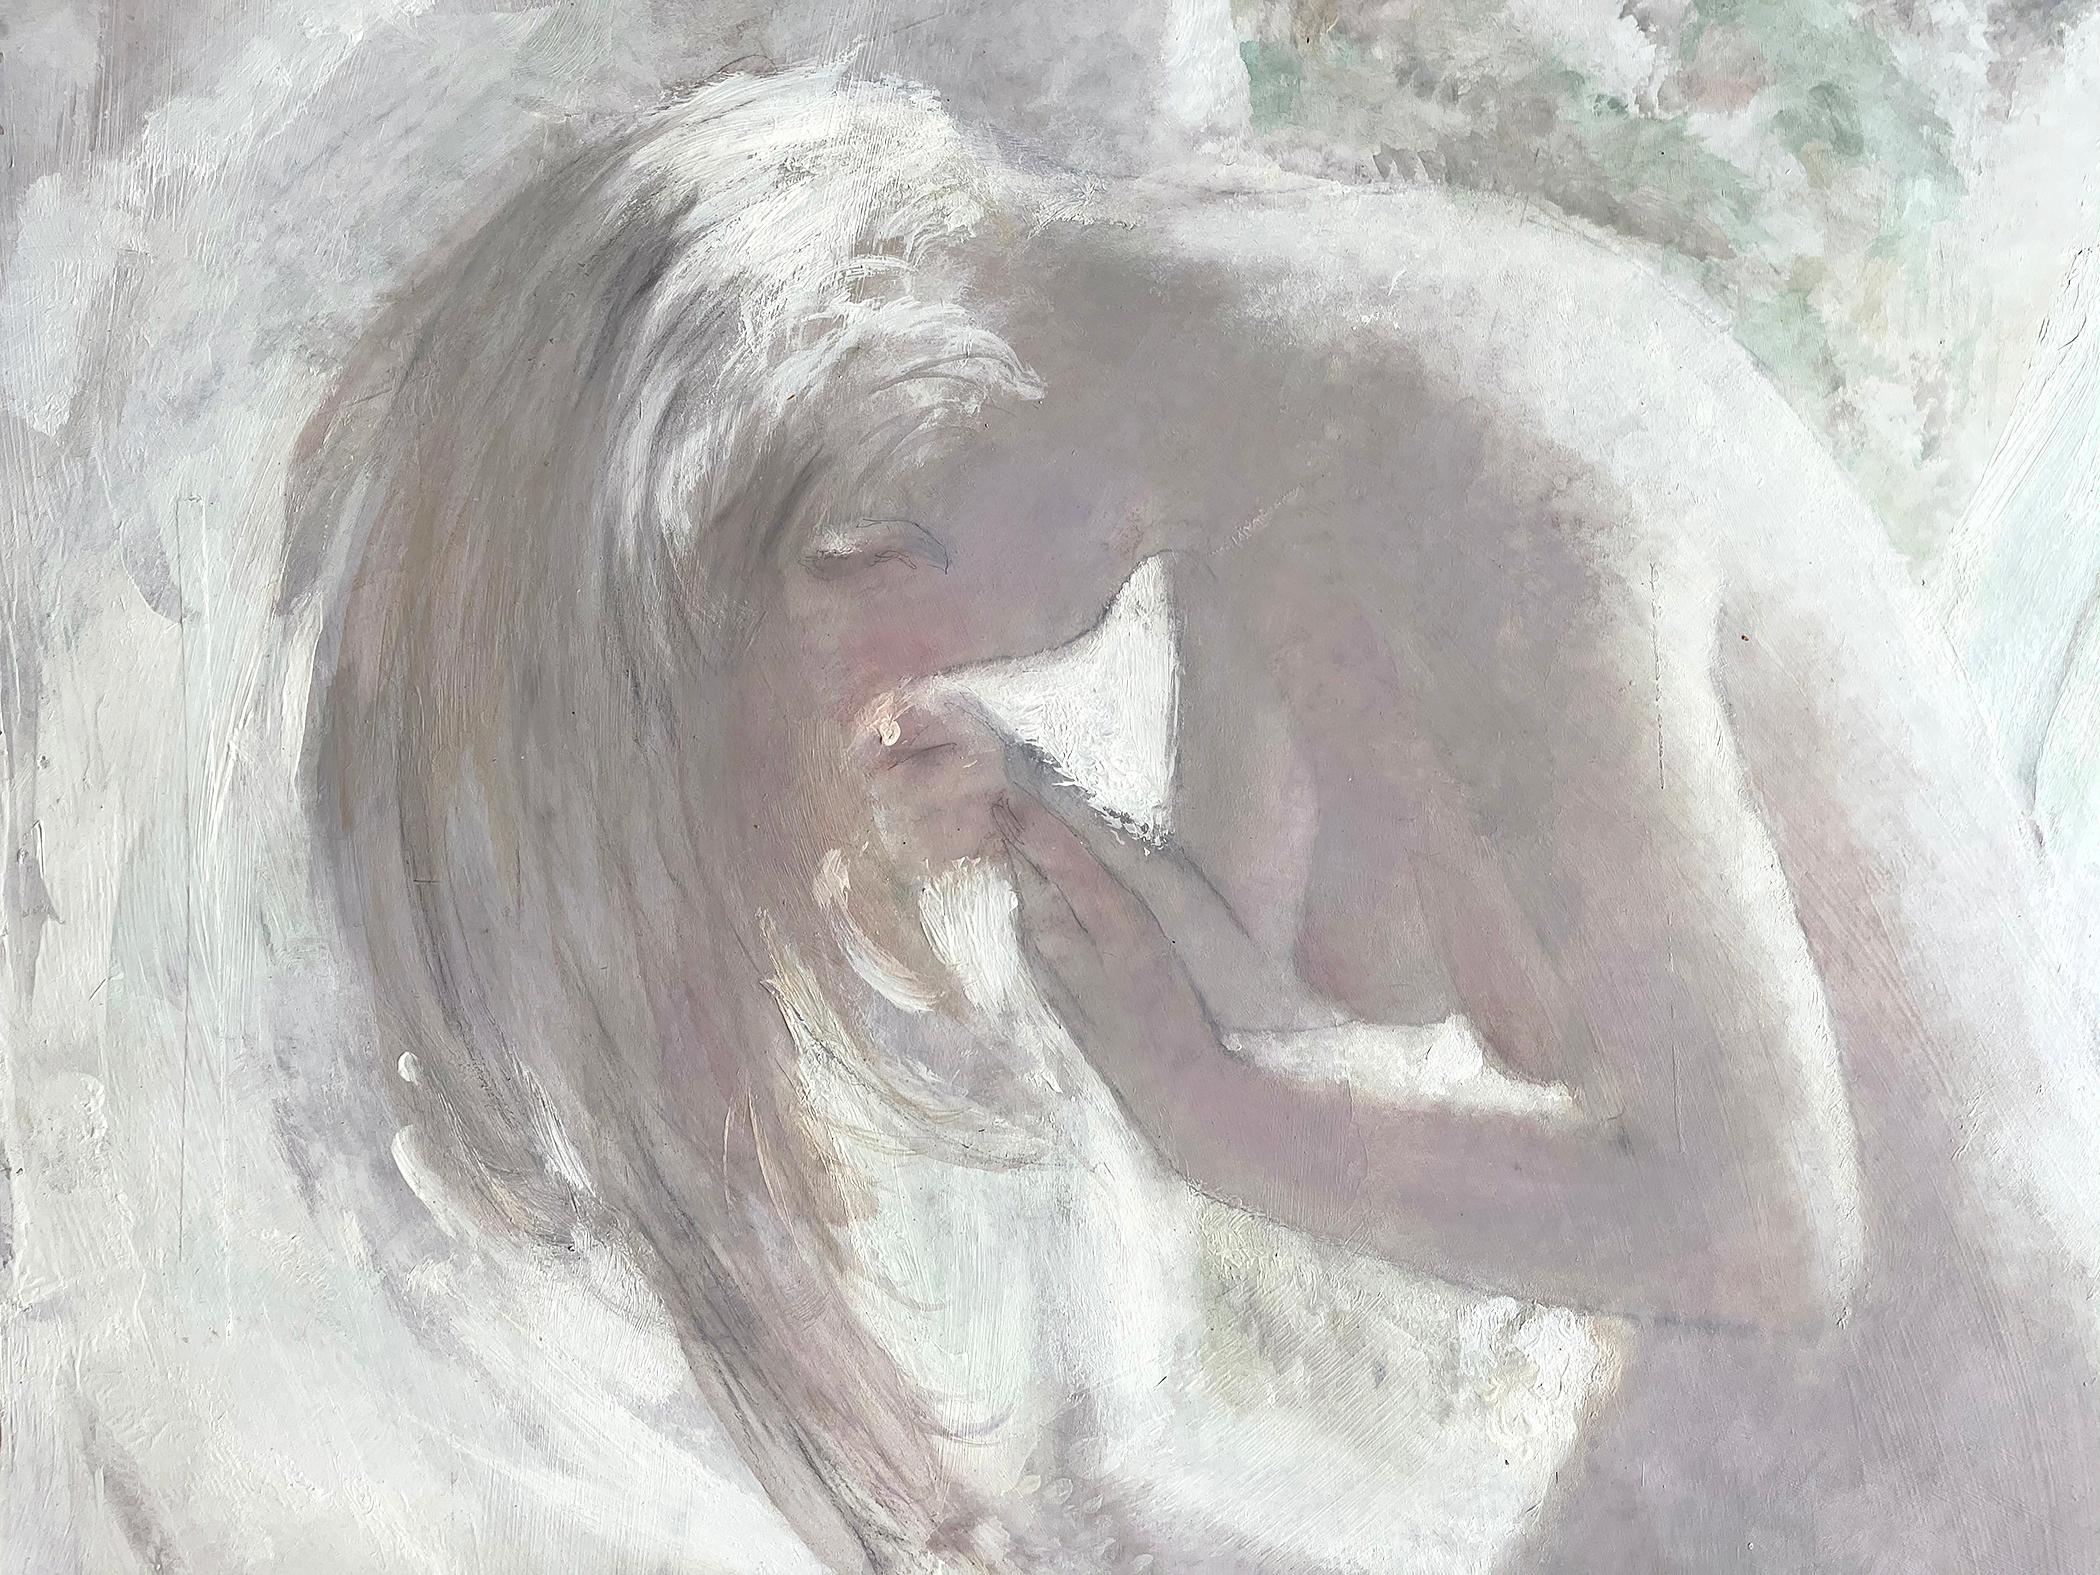 Blond Nude with Cat - White on White Monochromatic - Painting by Thornton Utz